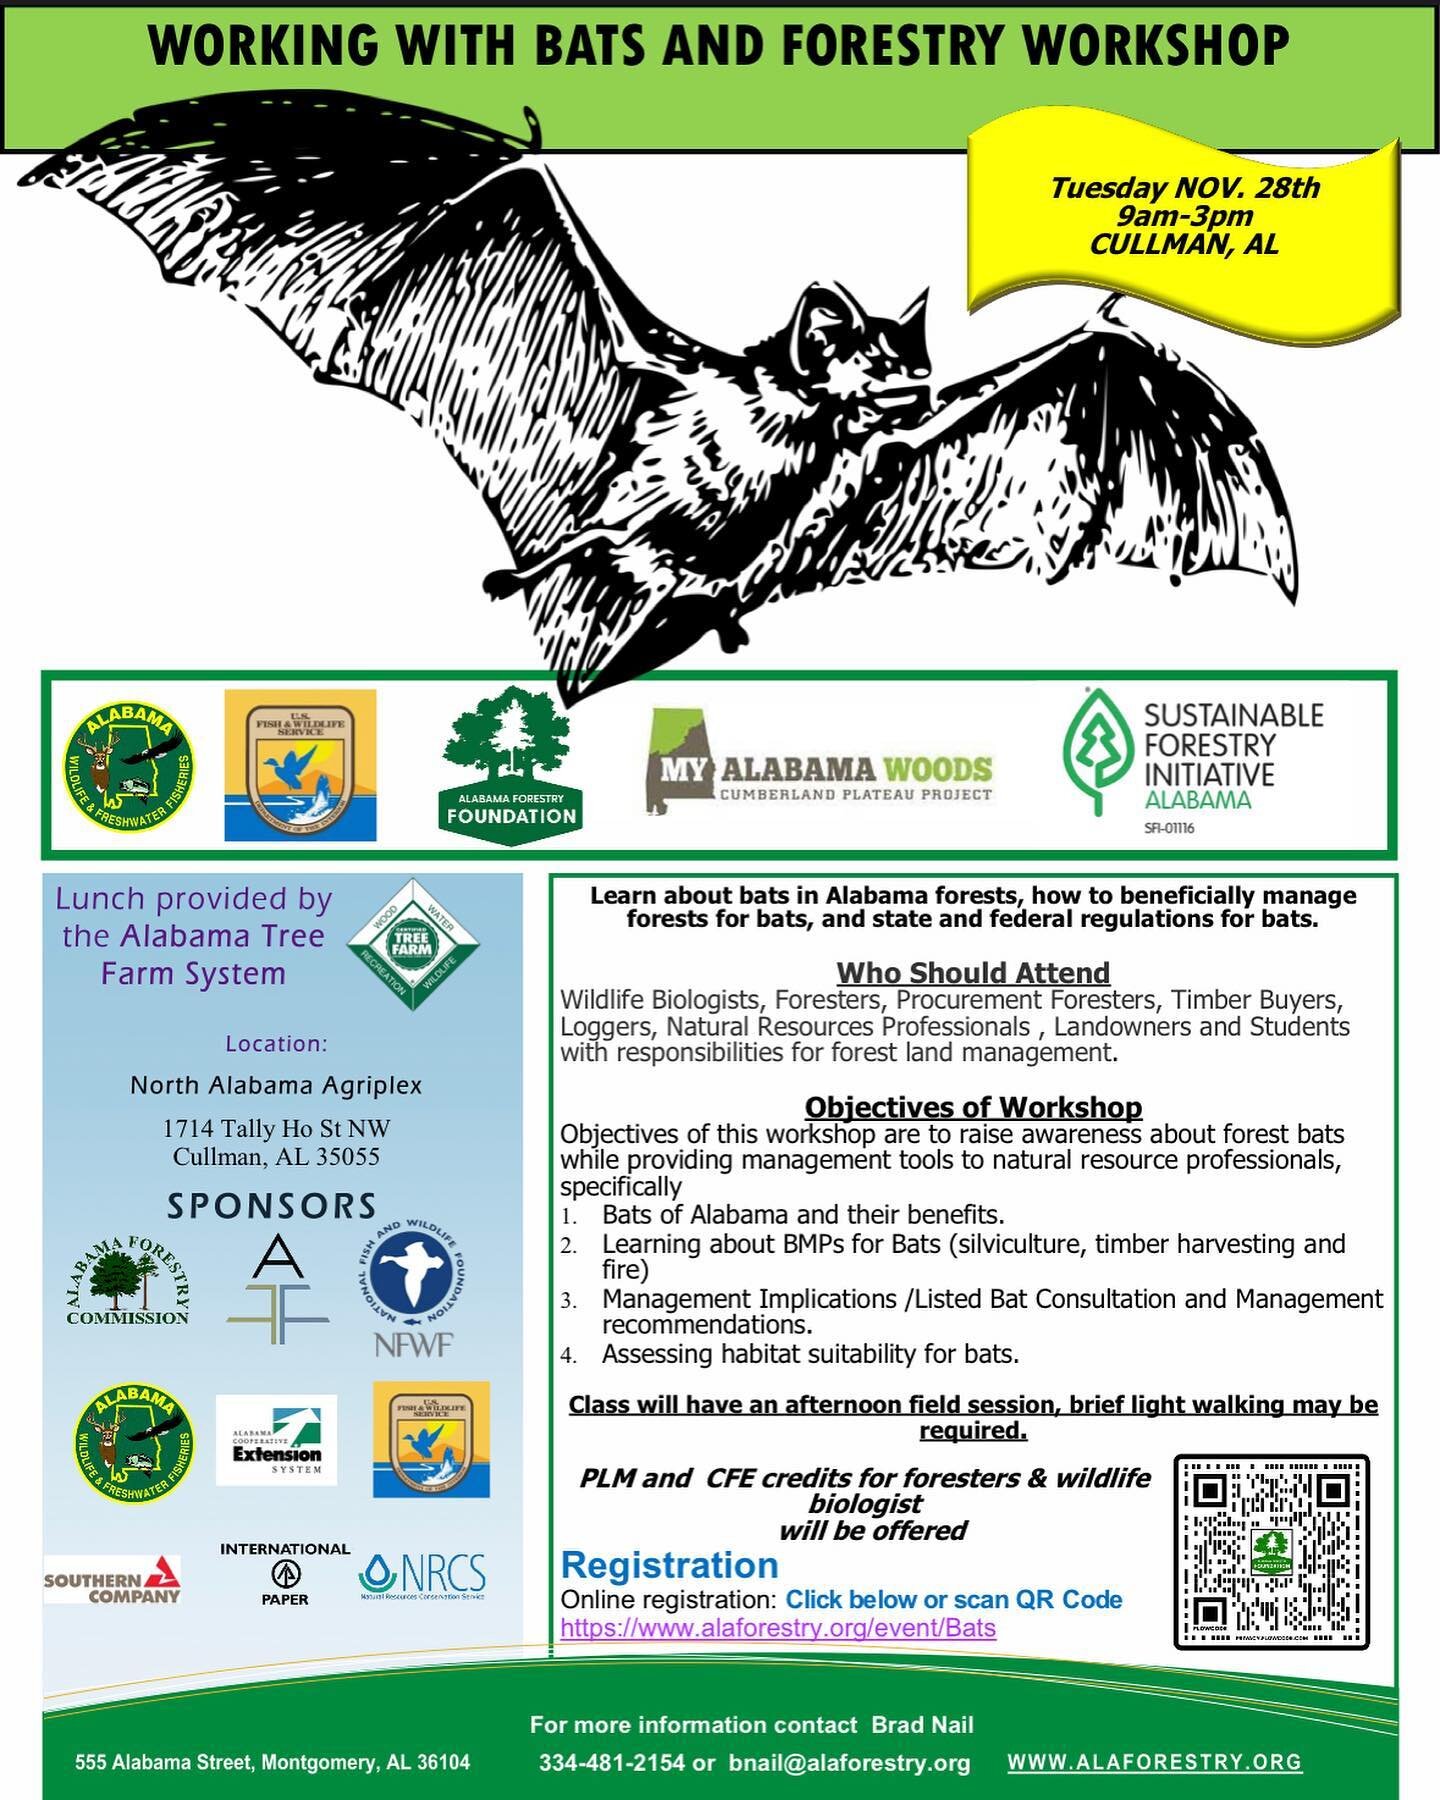 Working with Bats &amp; Forestry Workshop coming soon- November 28th, Cullman. Register today!